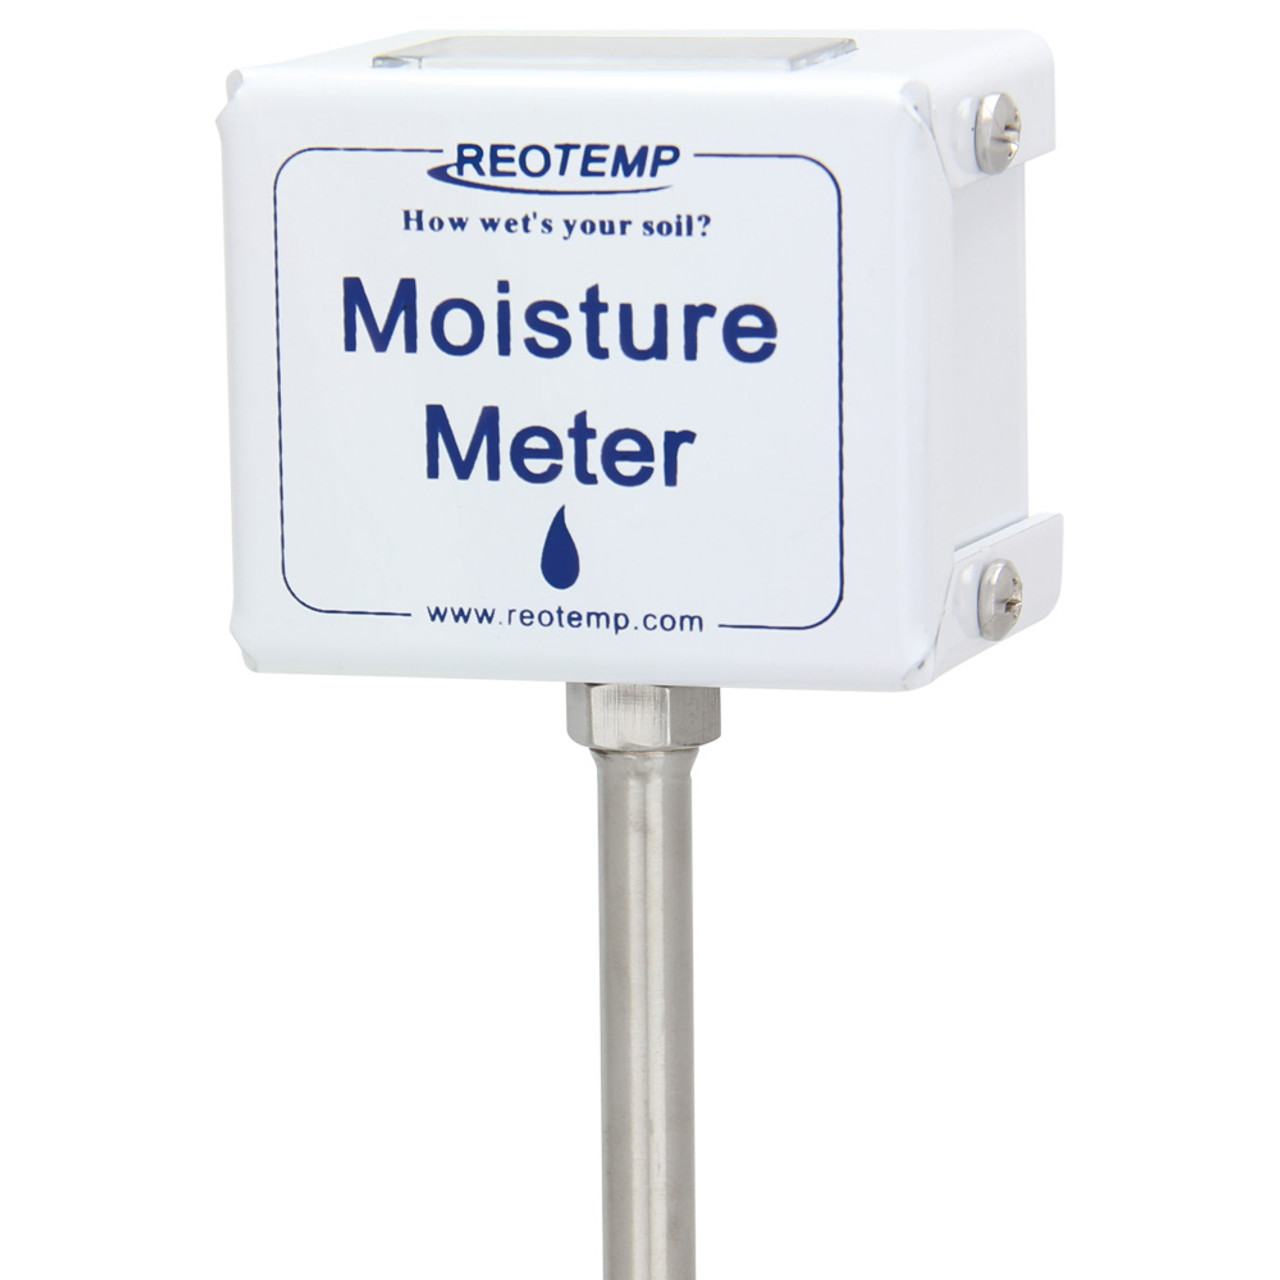 The Reotemp Garden and Compost Moisture Meter